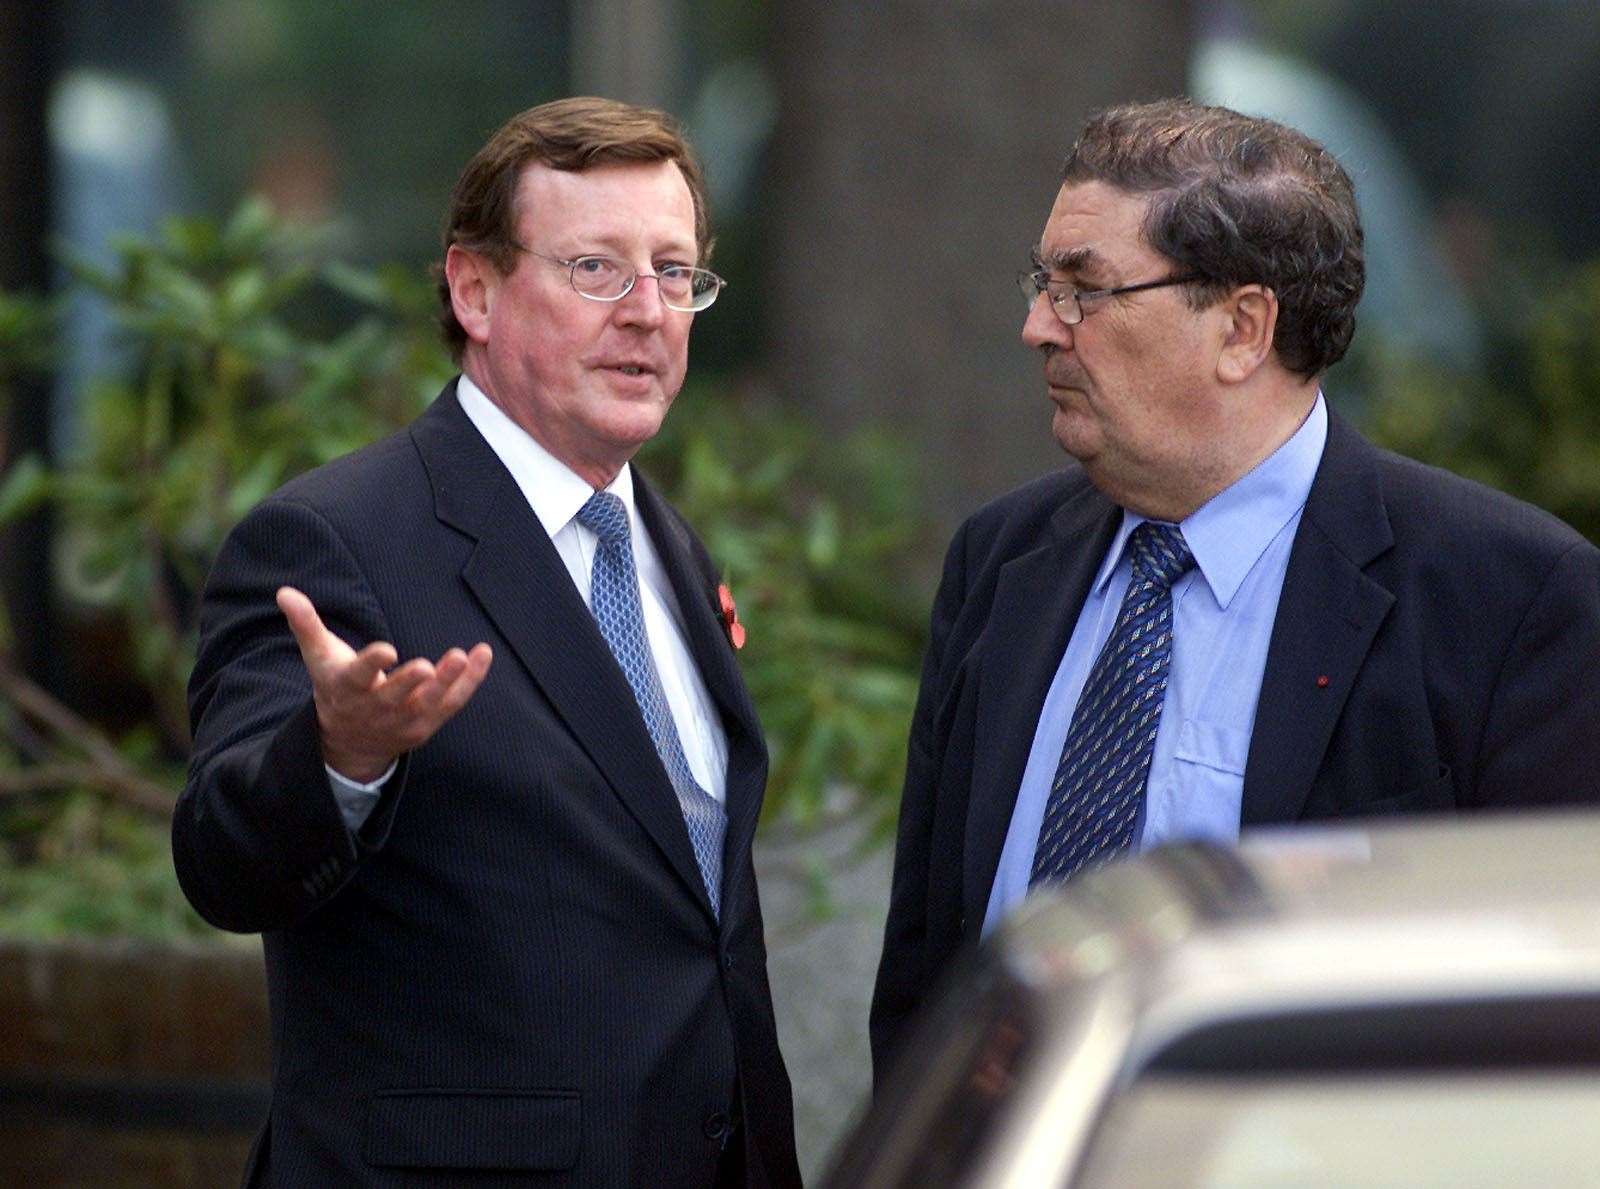 UUP leader David Trimble and SDLP leader John Hume were awarded the Nobel Peace Prize for their efforts (Paul Faith/PA)